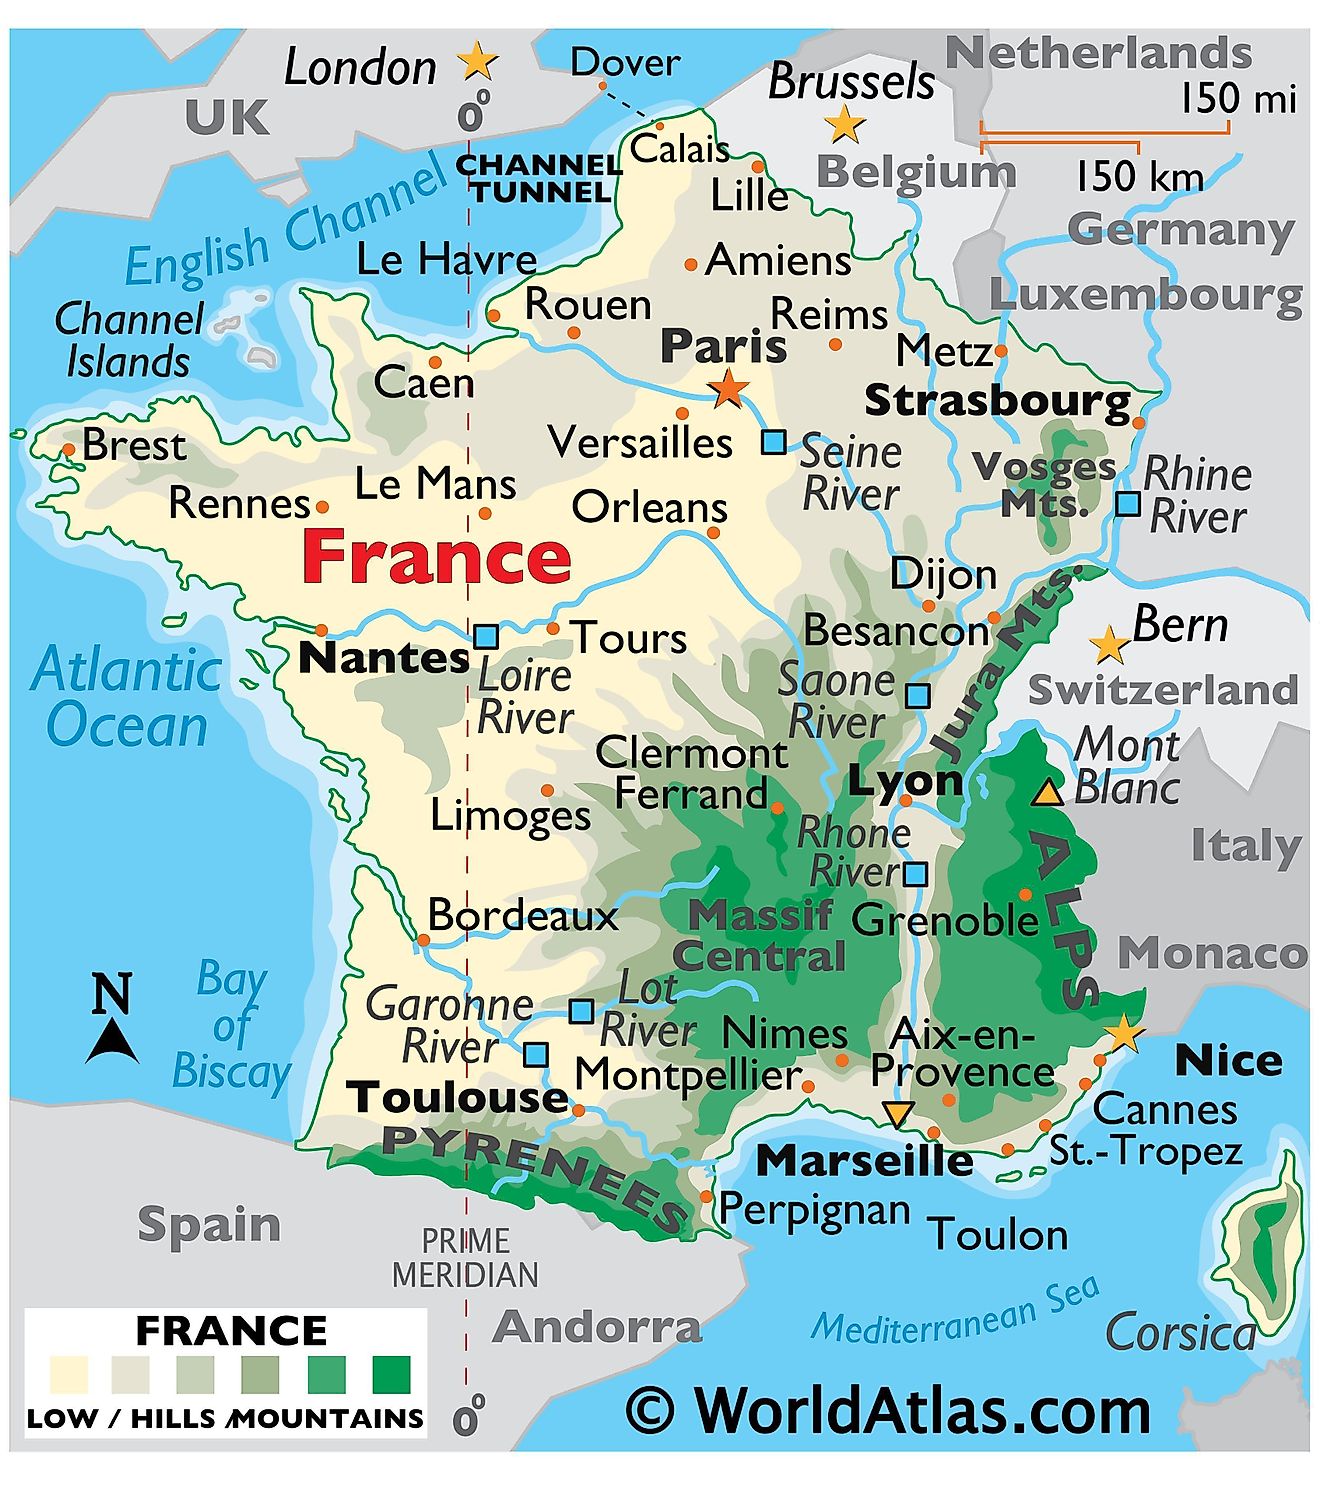 Physical Map of the France showing terrain, mountain ranges, Mont Blanc, major rivers, important cities, international boundaries, etc.